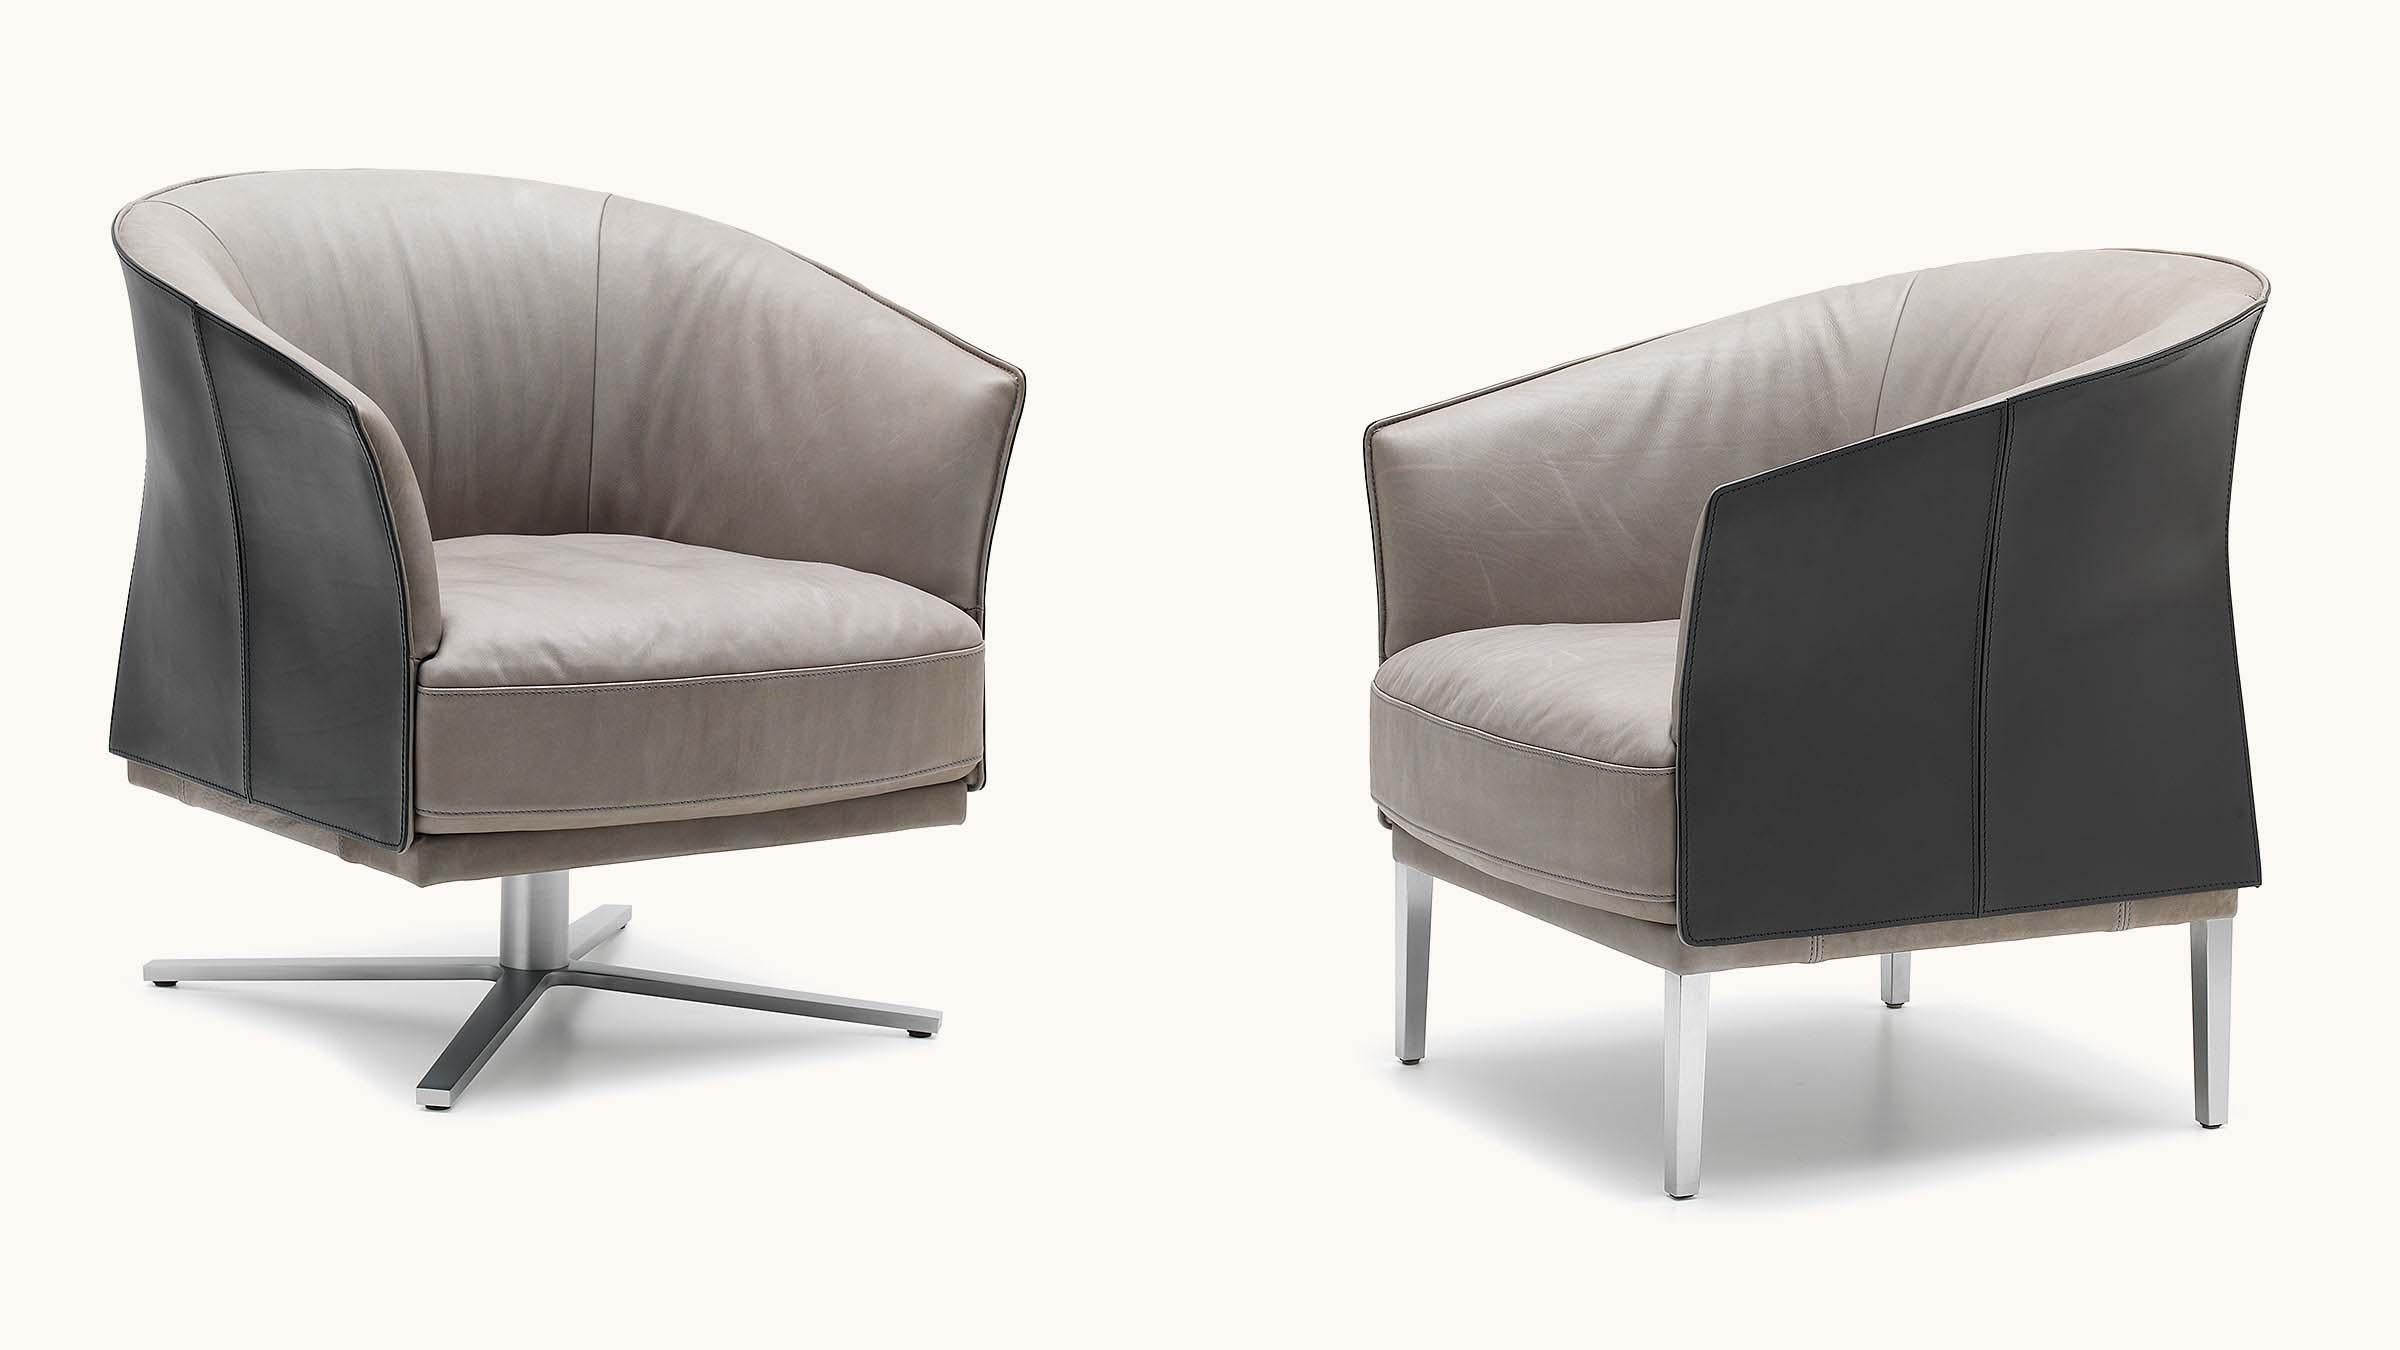 It’s like a chameleon: at first hidden and inconspicuous but due to his appearance it is adaptable and inexpressively full of character. We are talking about the dainty fauteuil DS-291. Despite its compact appearance, the DS-291 is ideally suited to